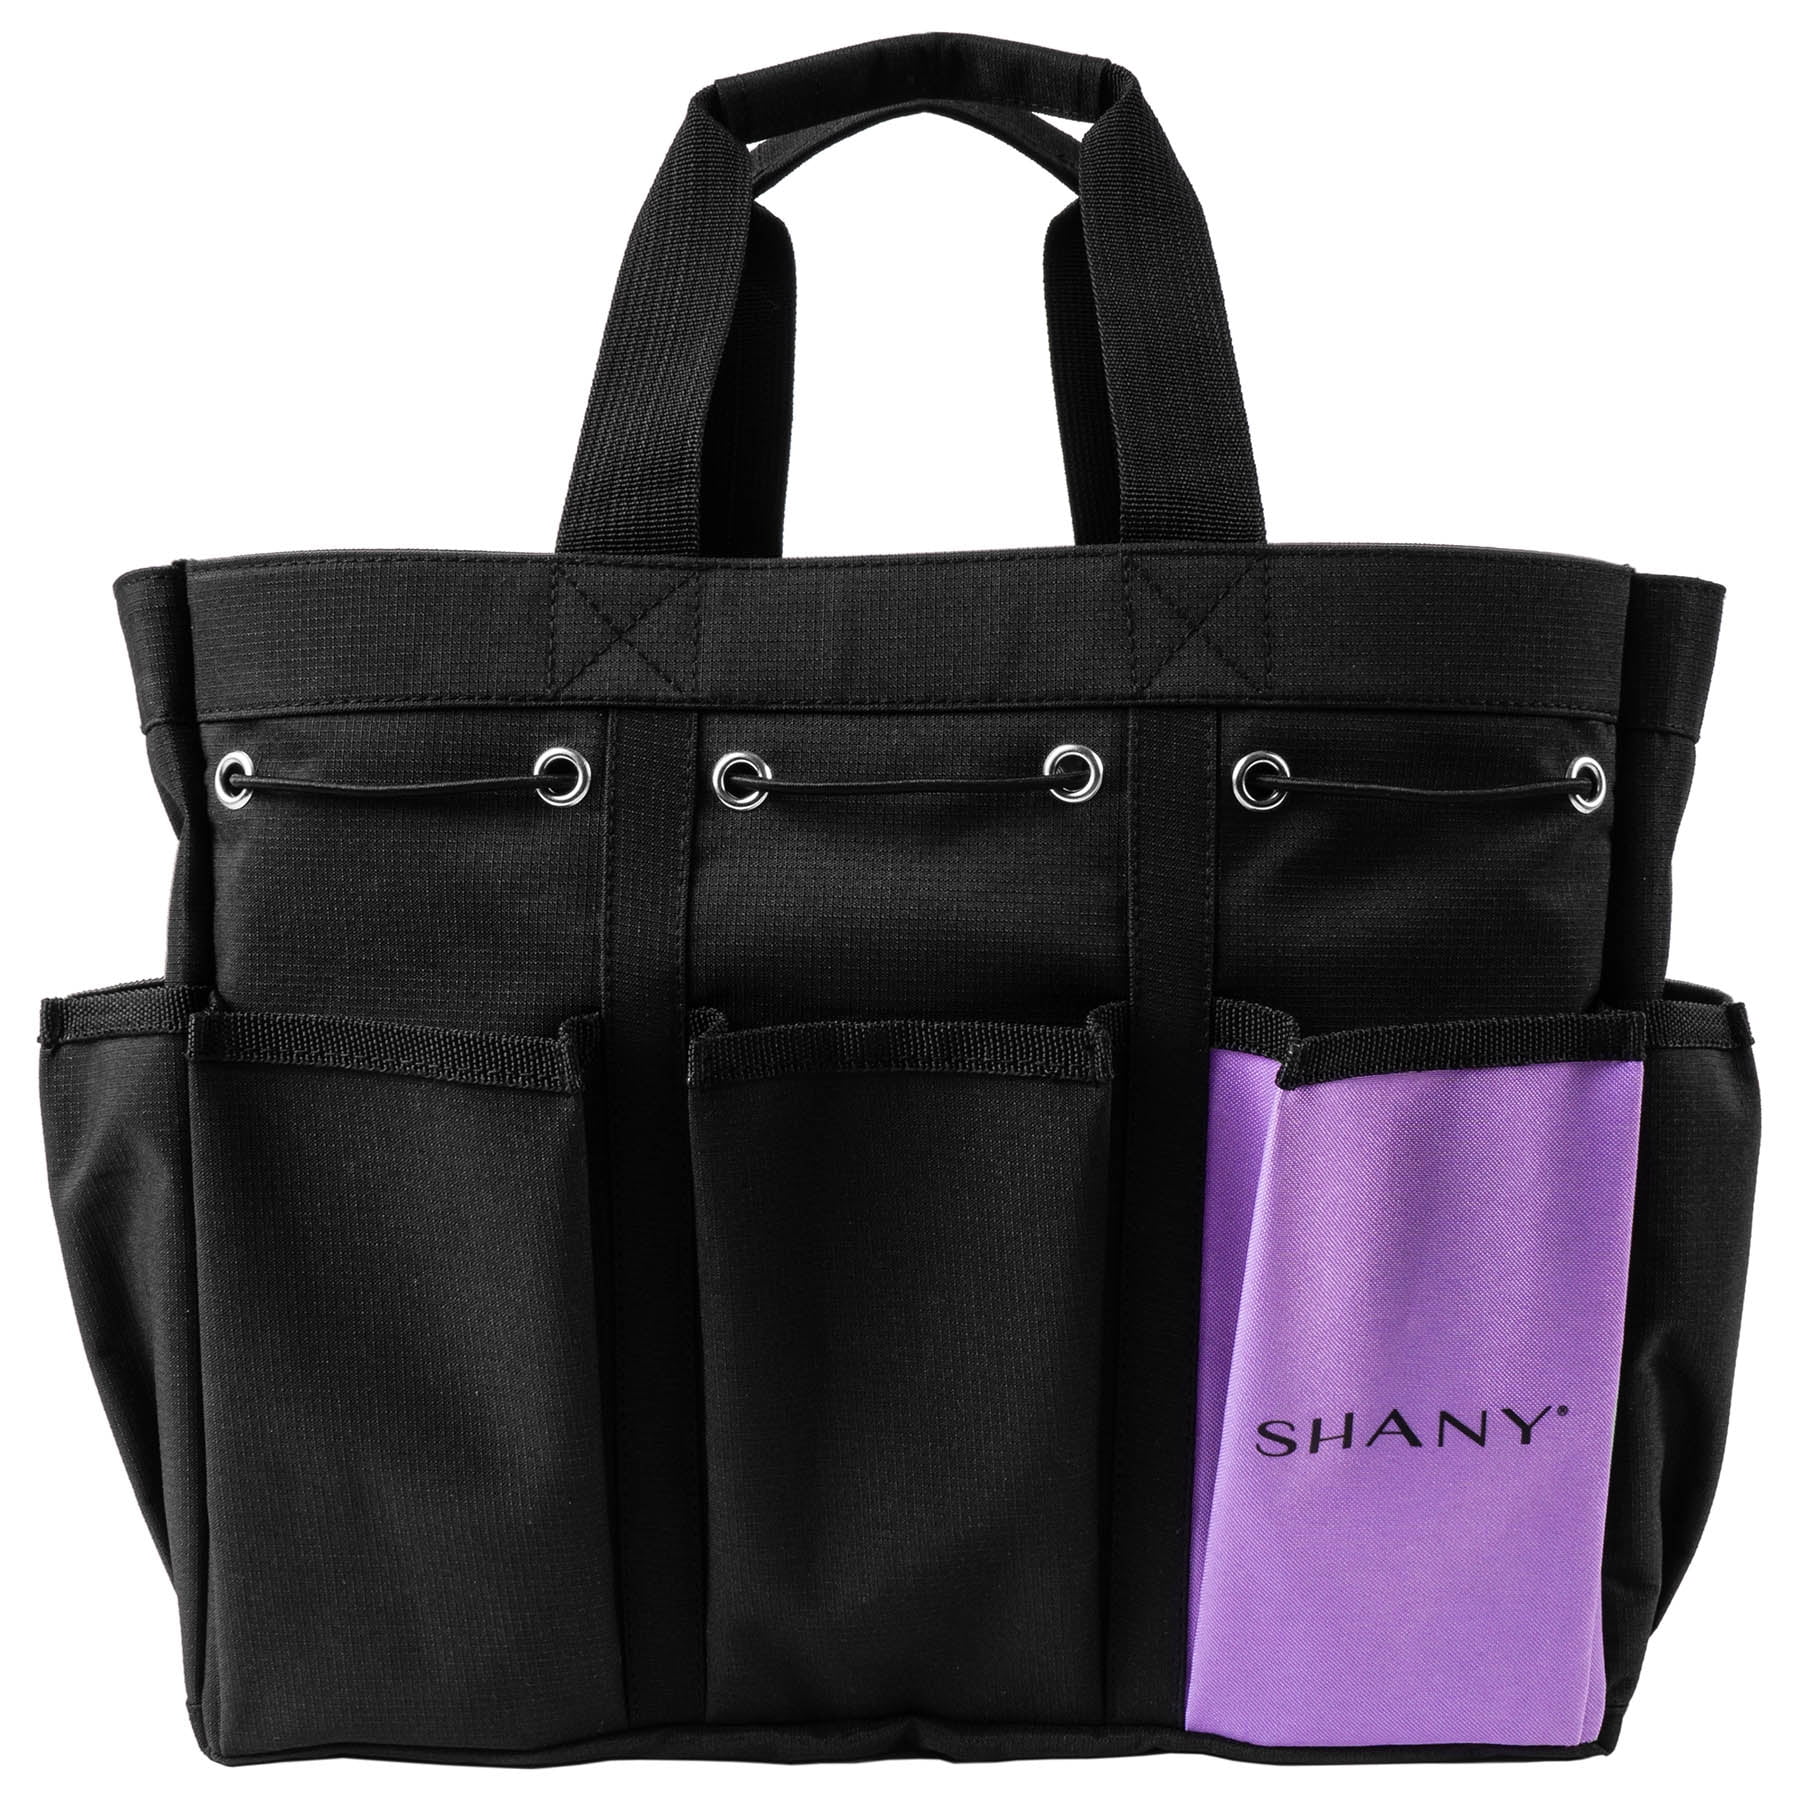 SHANY Clear PVC Makeup Bag PURPLE SH-PC01PR Large Professional Makeup Artist Rectangular Tote with Shoulder Strap and 5 External Pockets